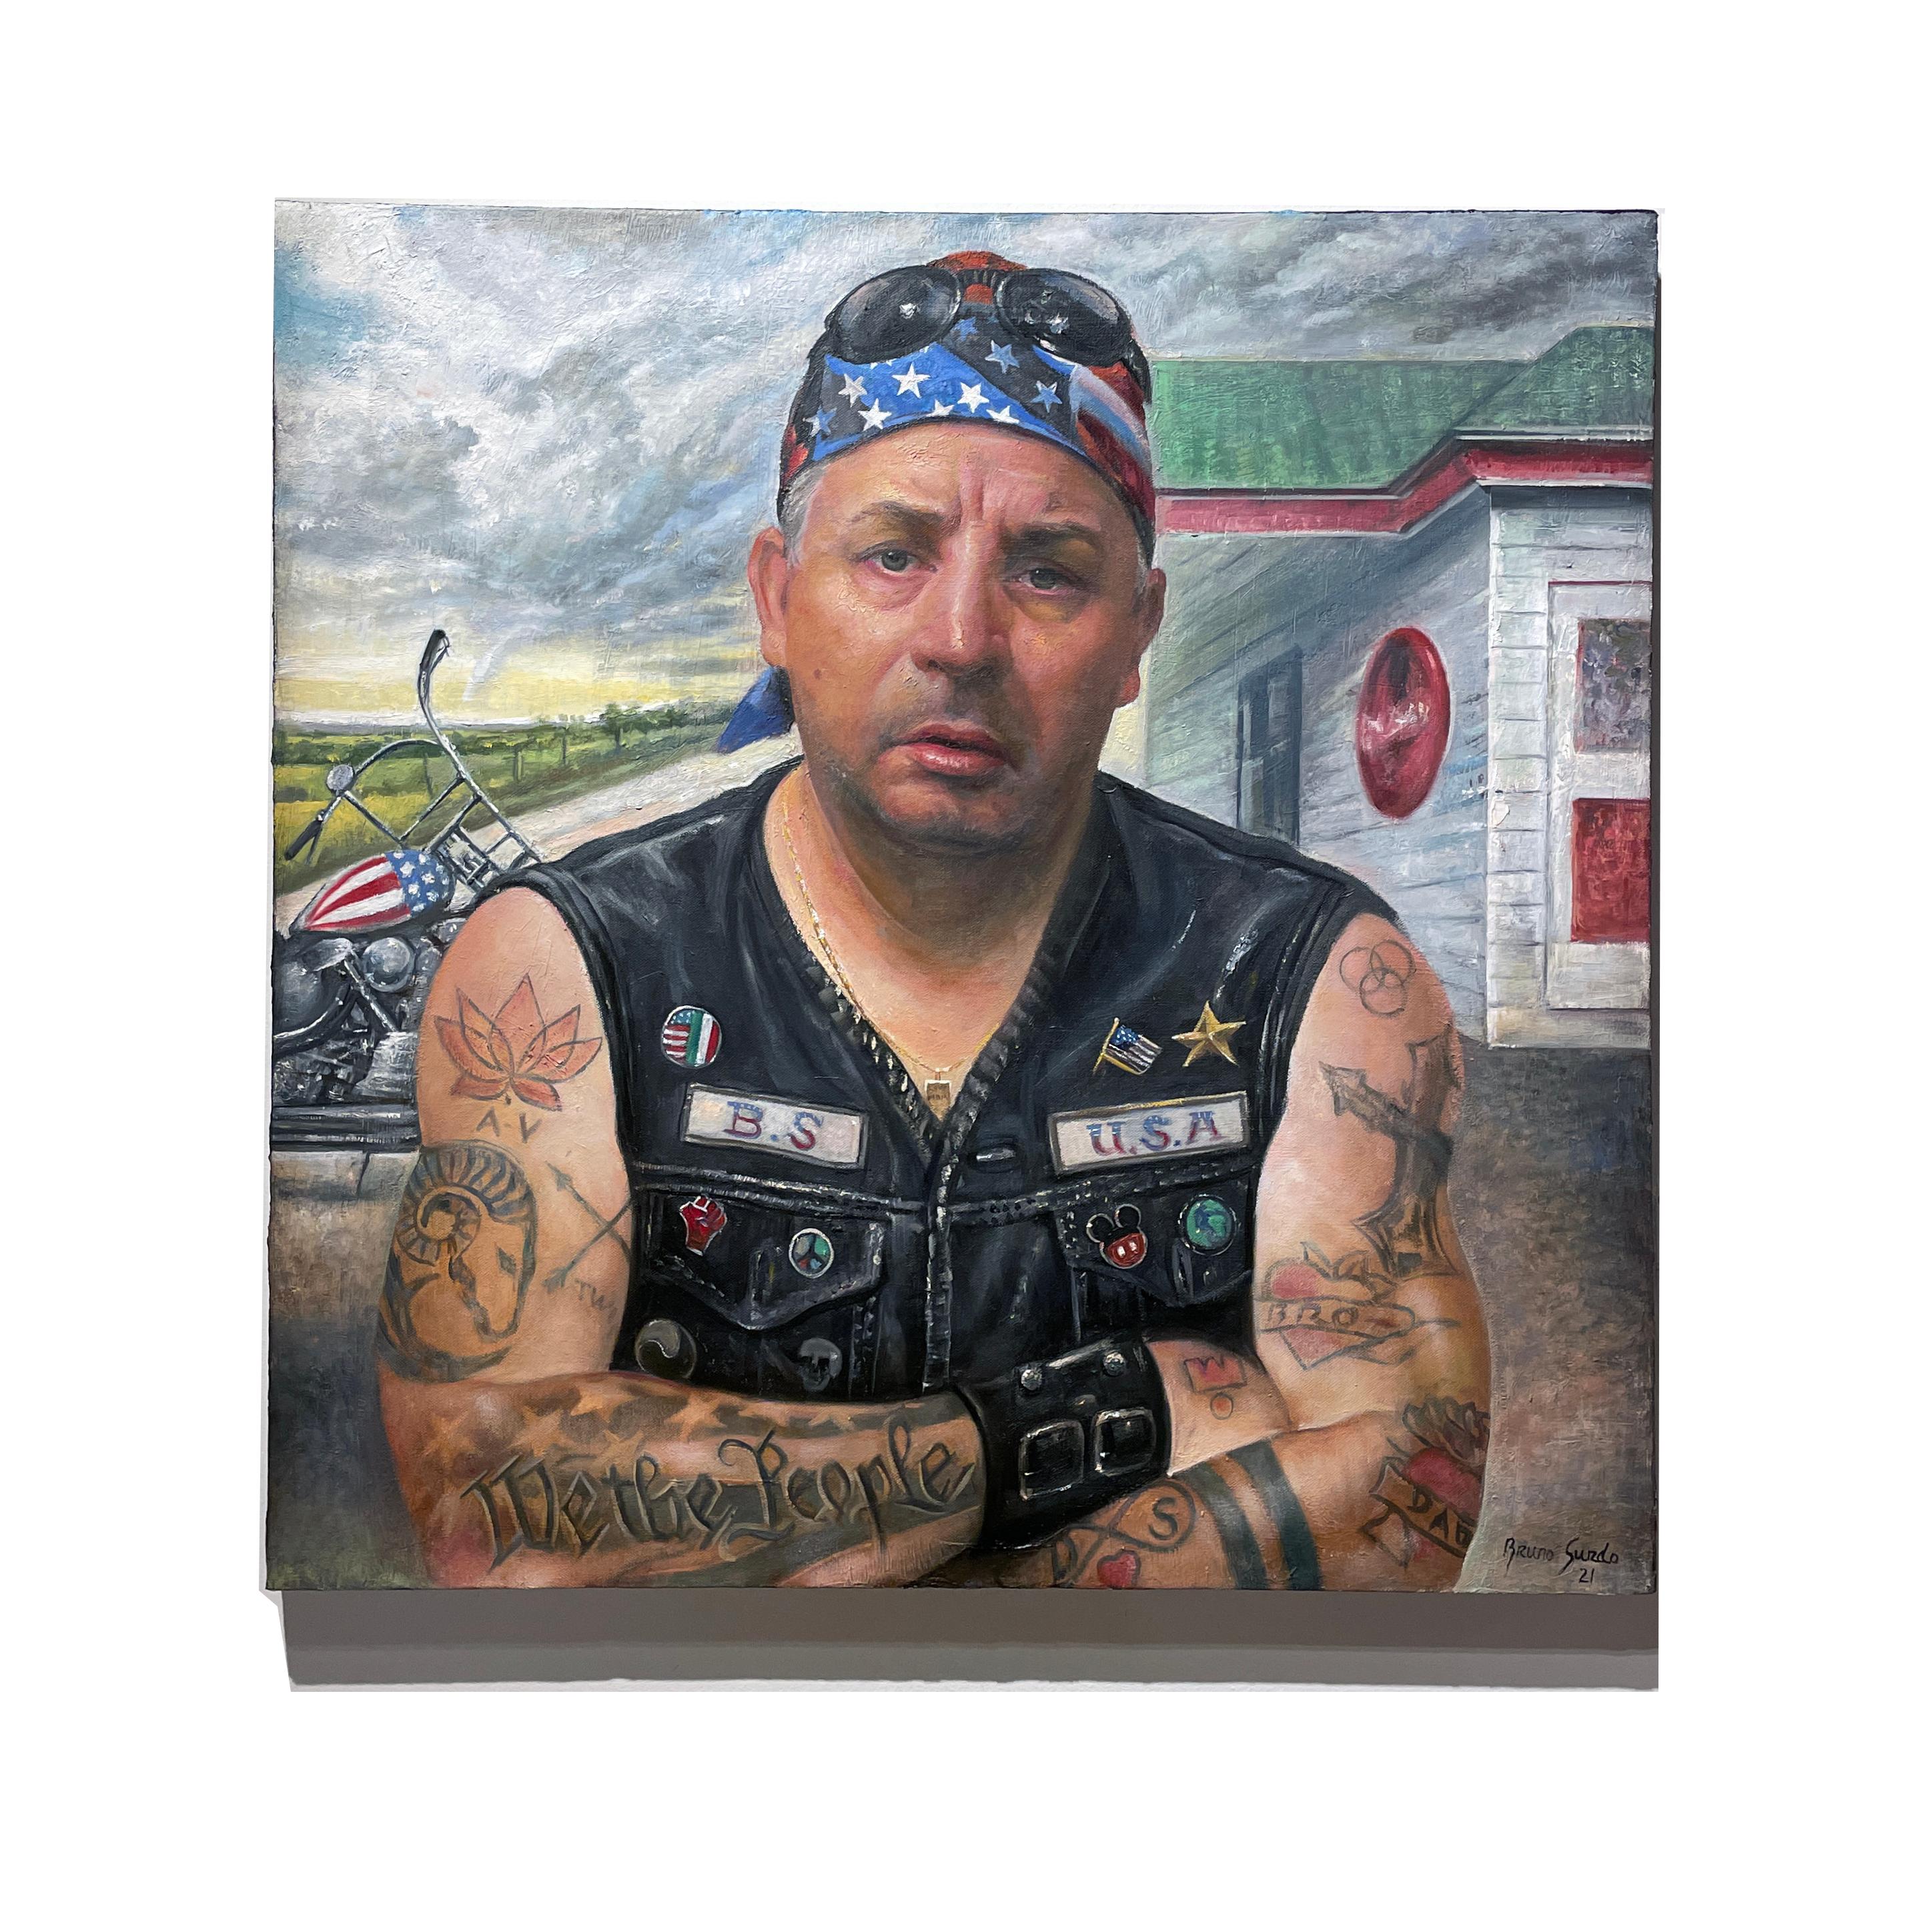 Is A Storm Coming? - Portrait of a Tattooed Biker, Original Oil on Canvas - Contemporary Painting by Bruno Surdo